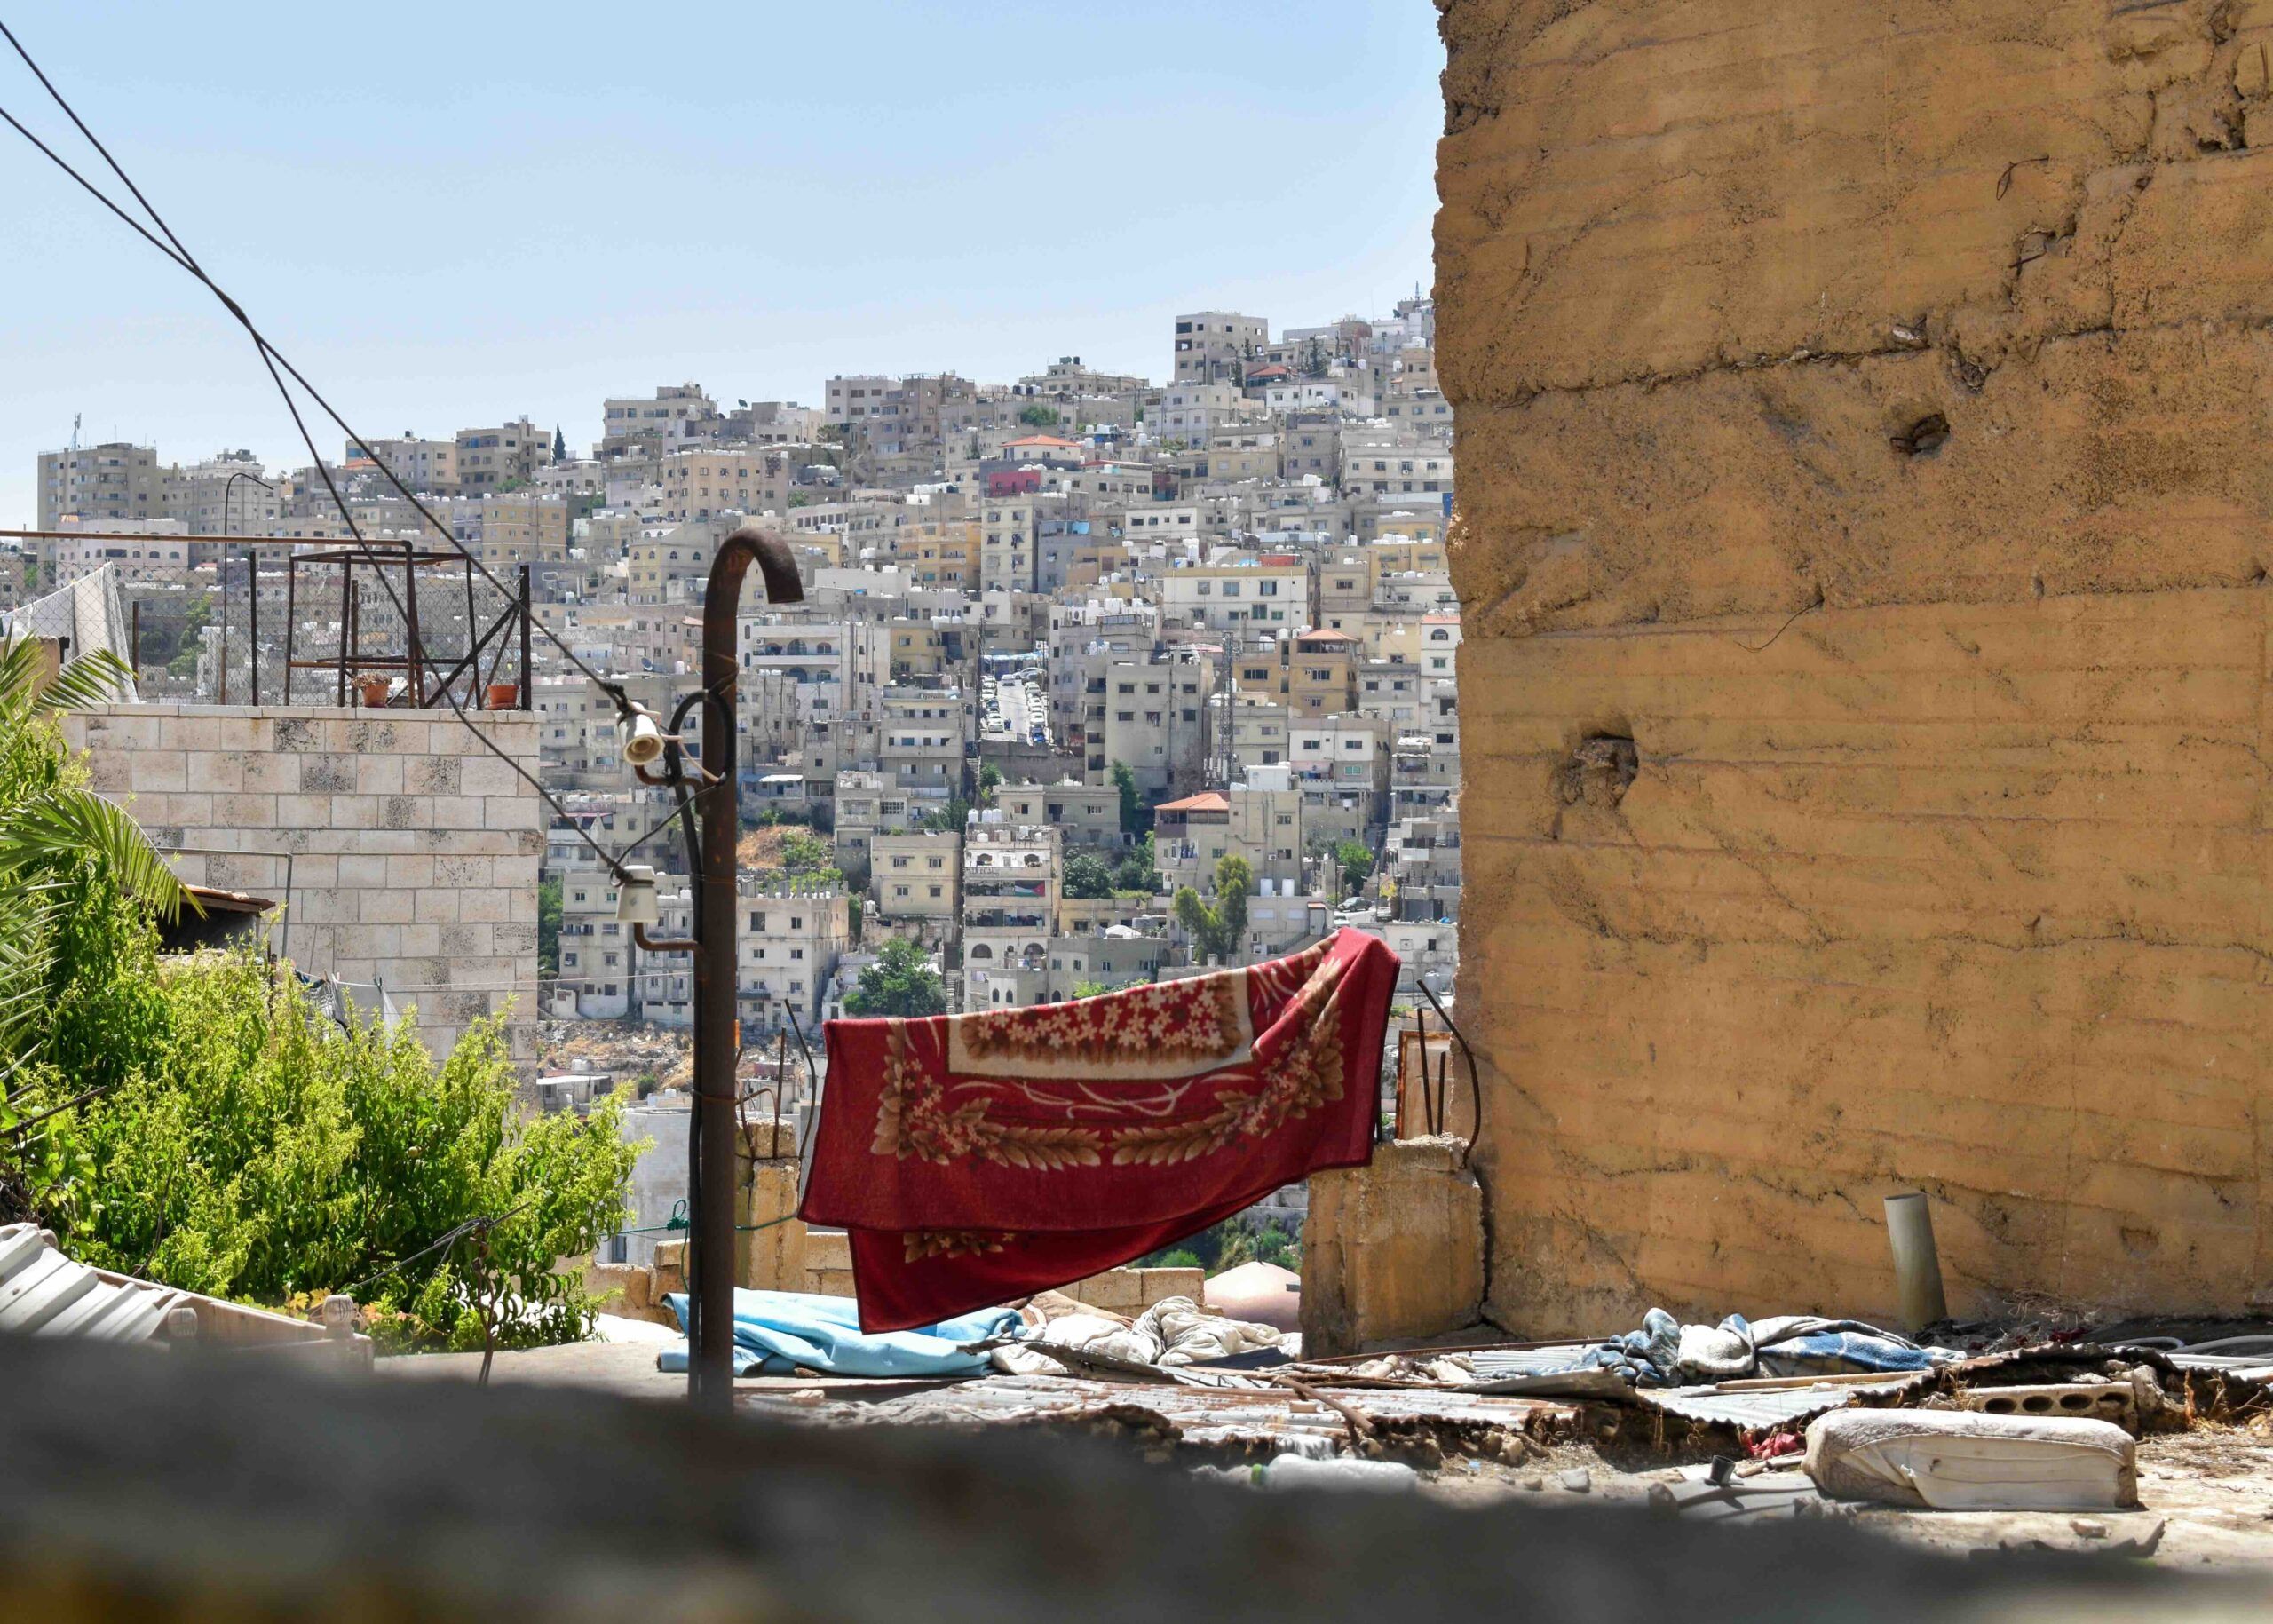 View of Amman Hillside with red blanket hanging off the clothesline between a pole and a wall.